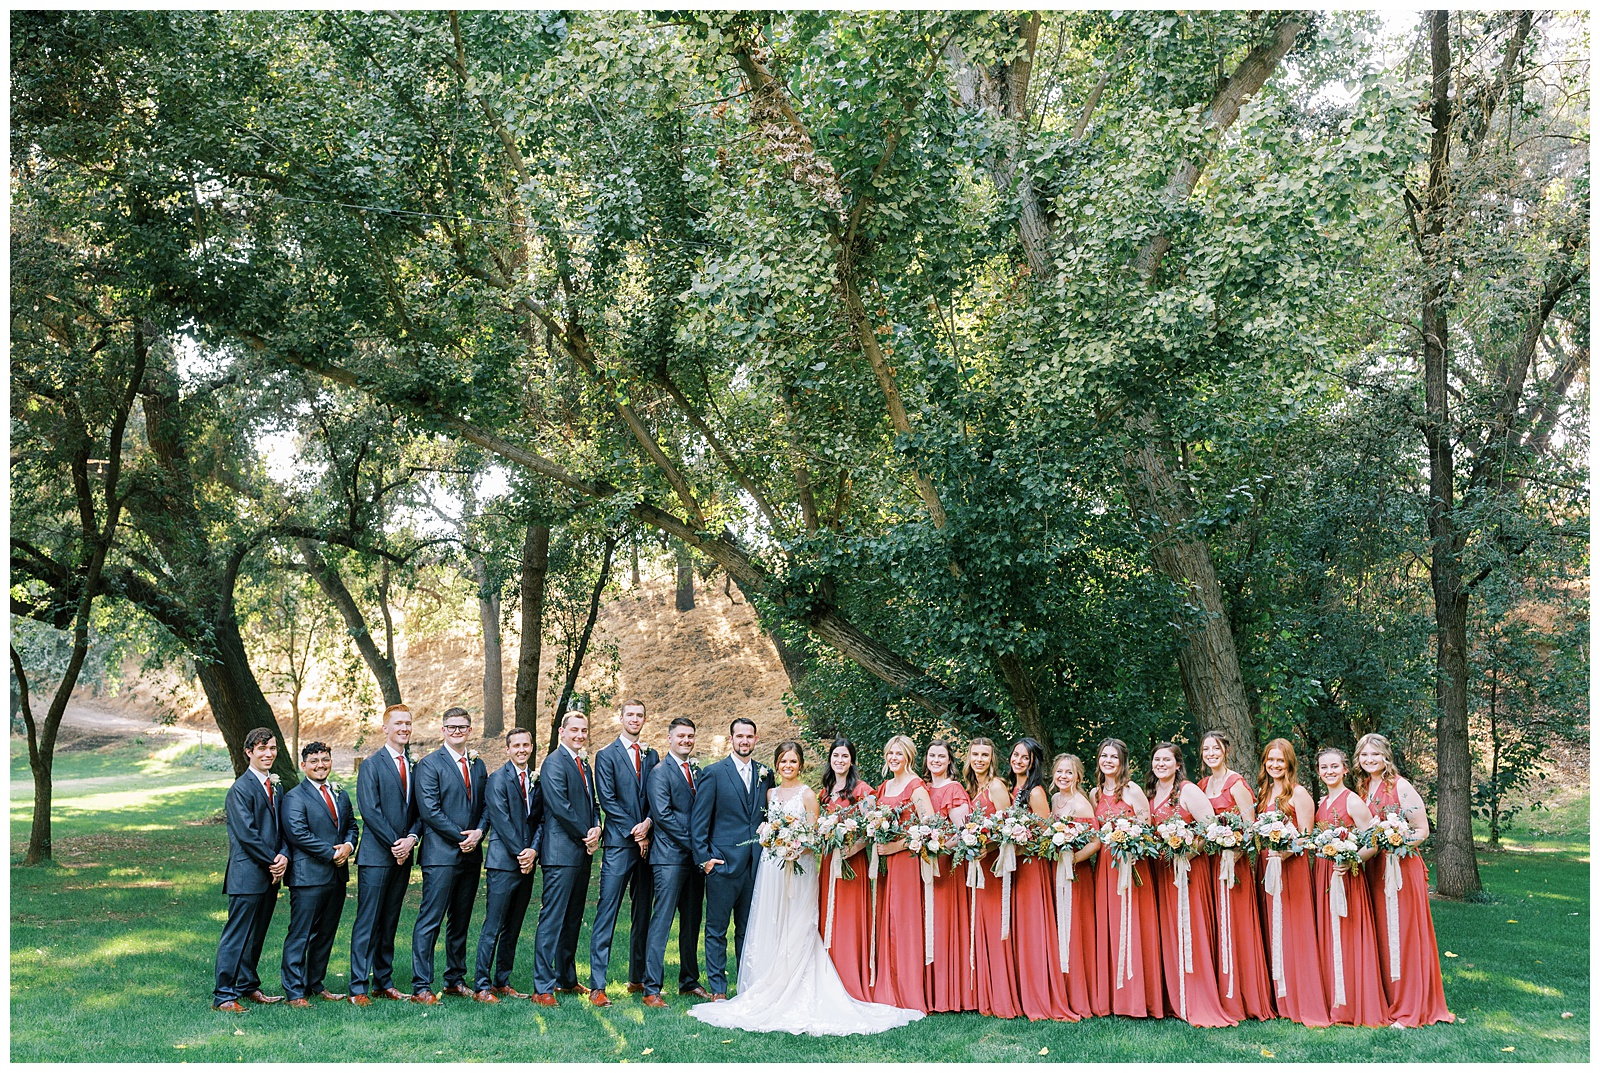 rust and grey bridal party photo outdoors under oak trees